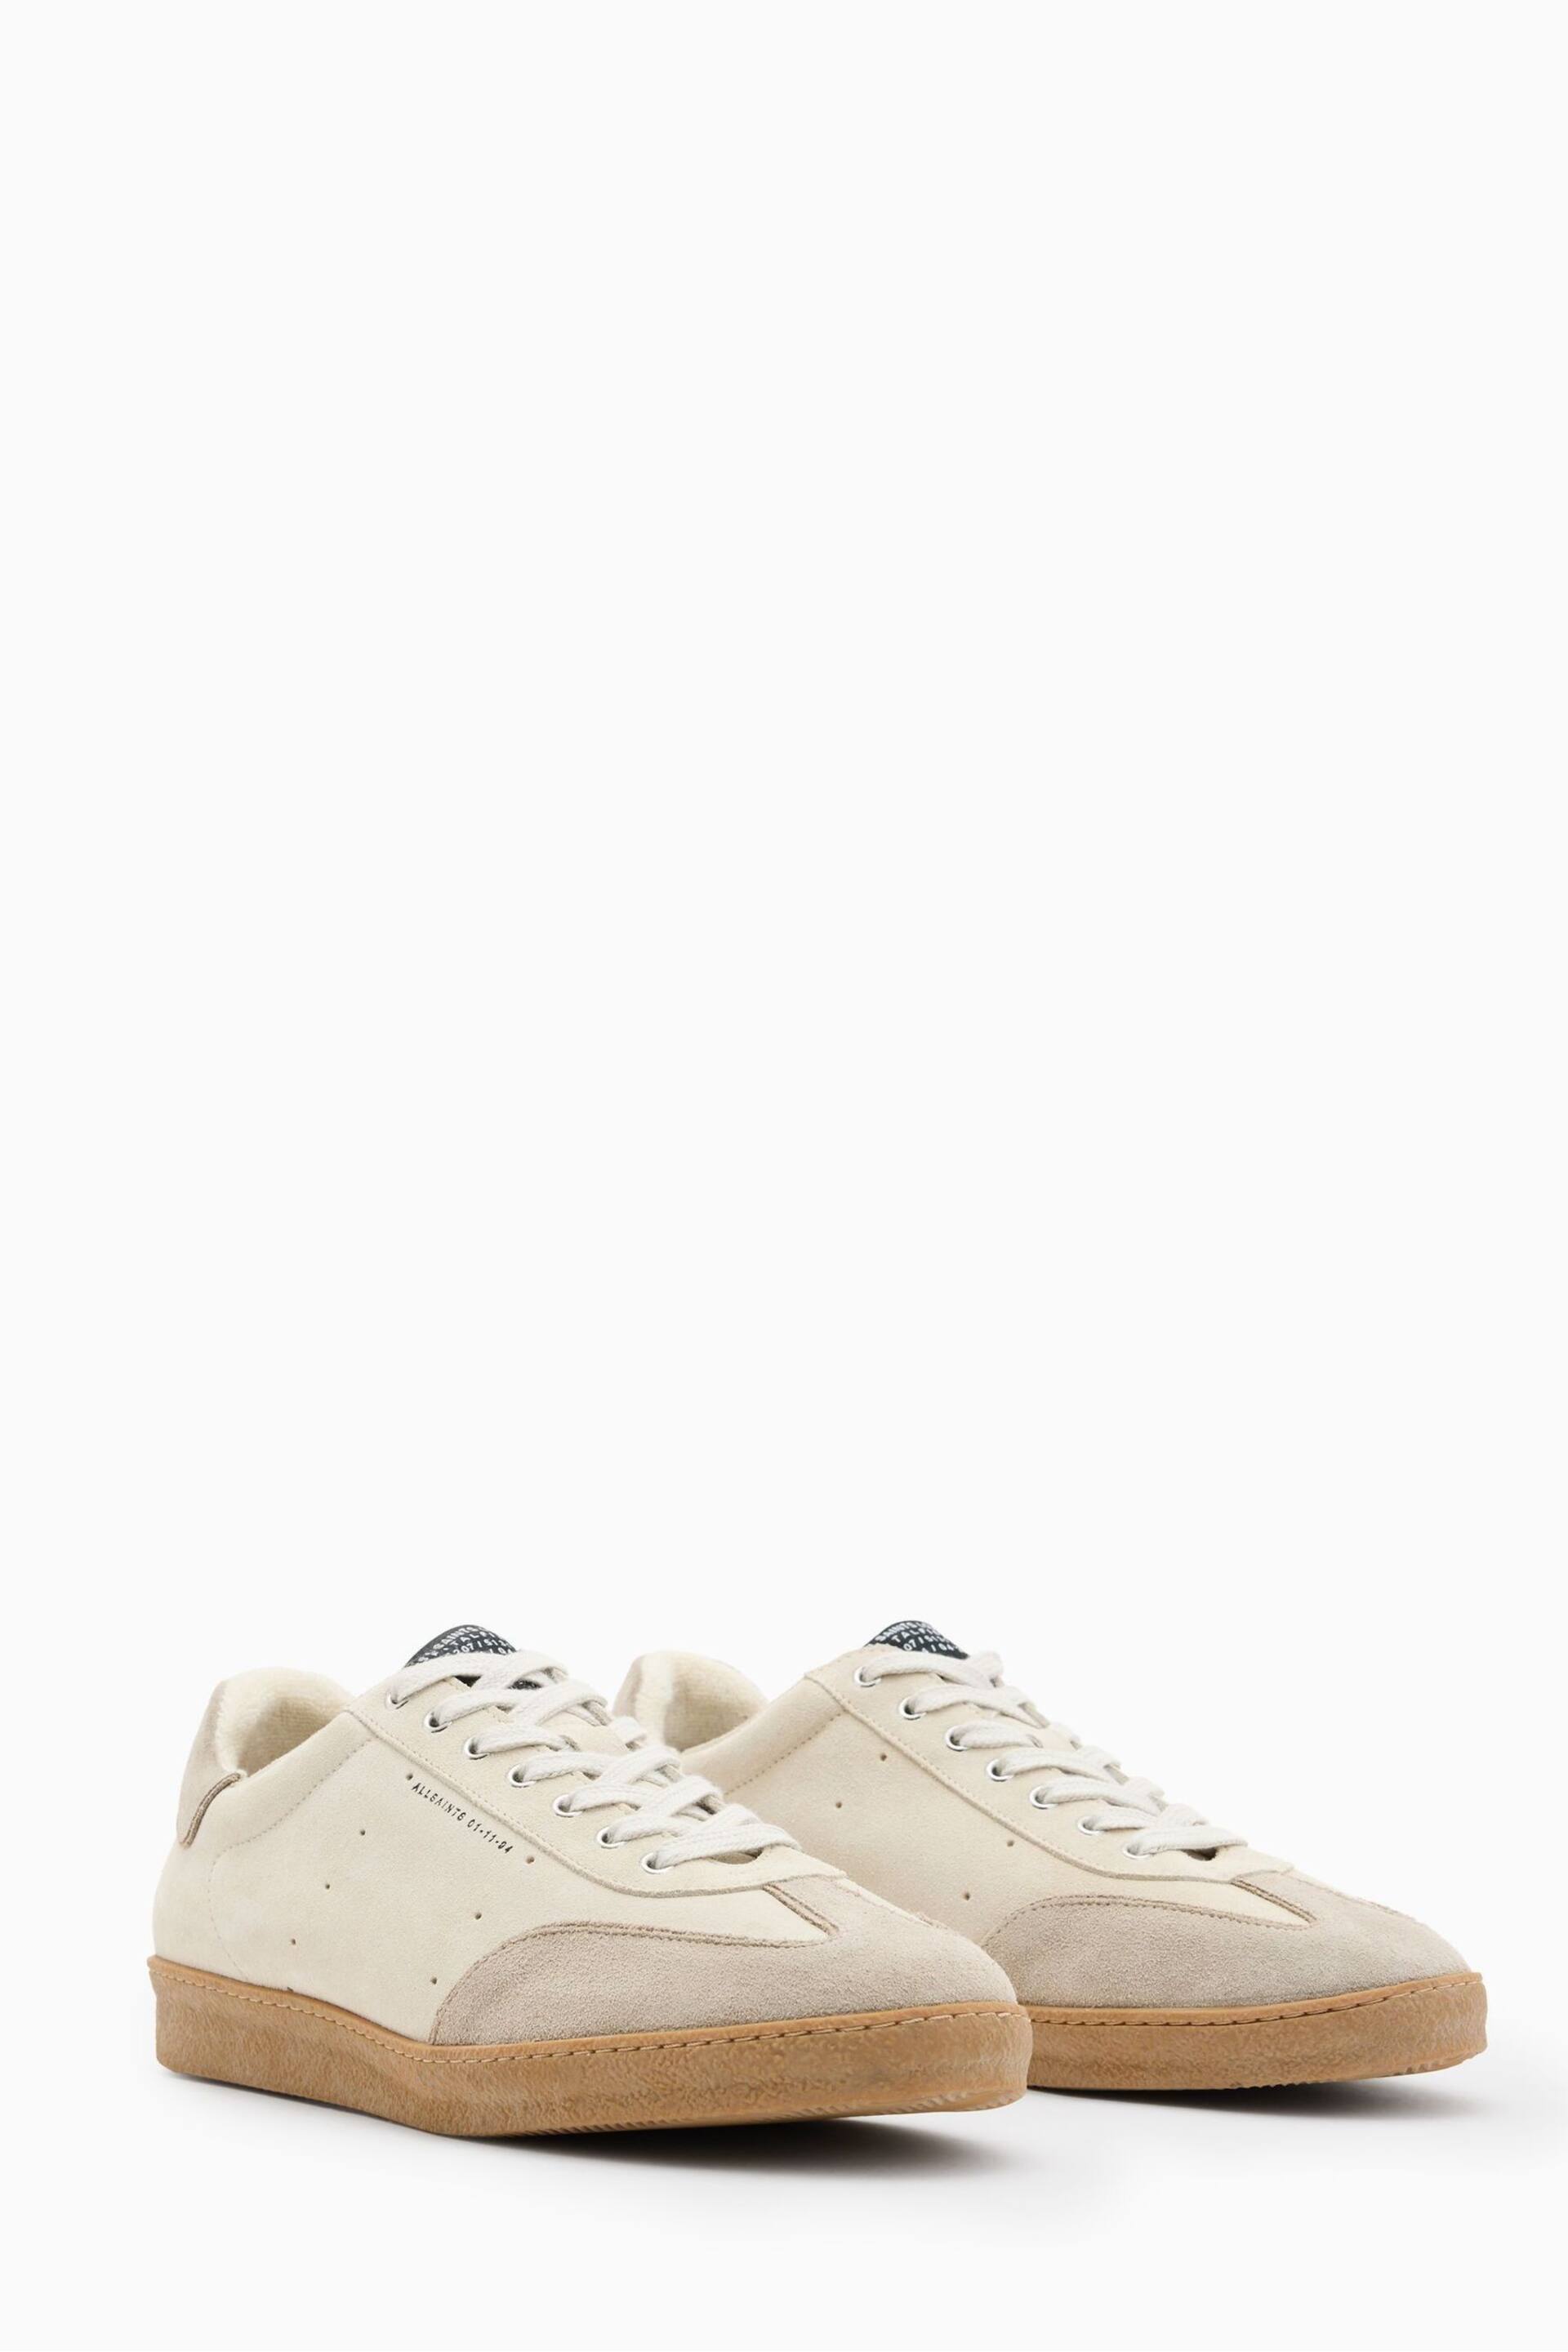 AllSaints White Leo Suede Low Shoes - Image 3 of 5